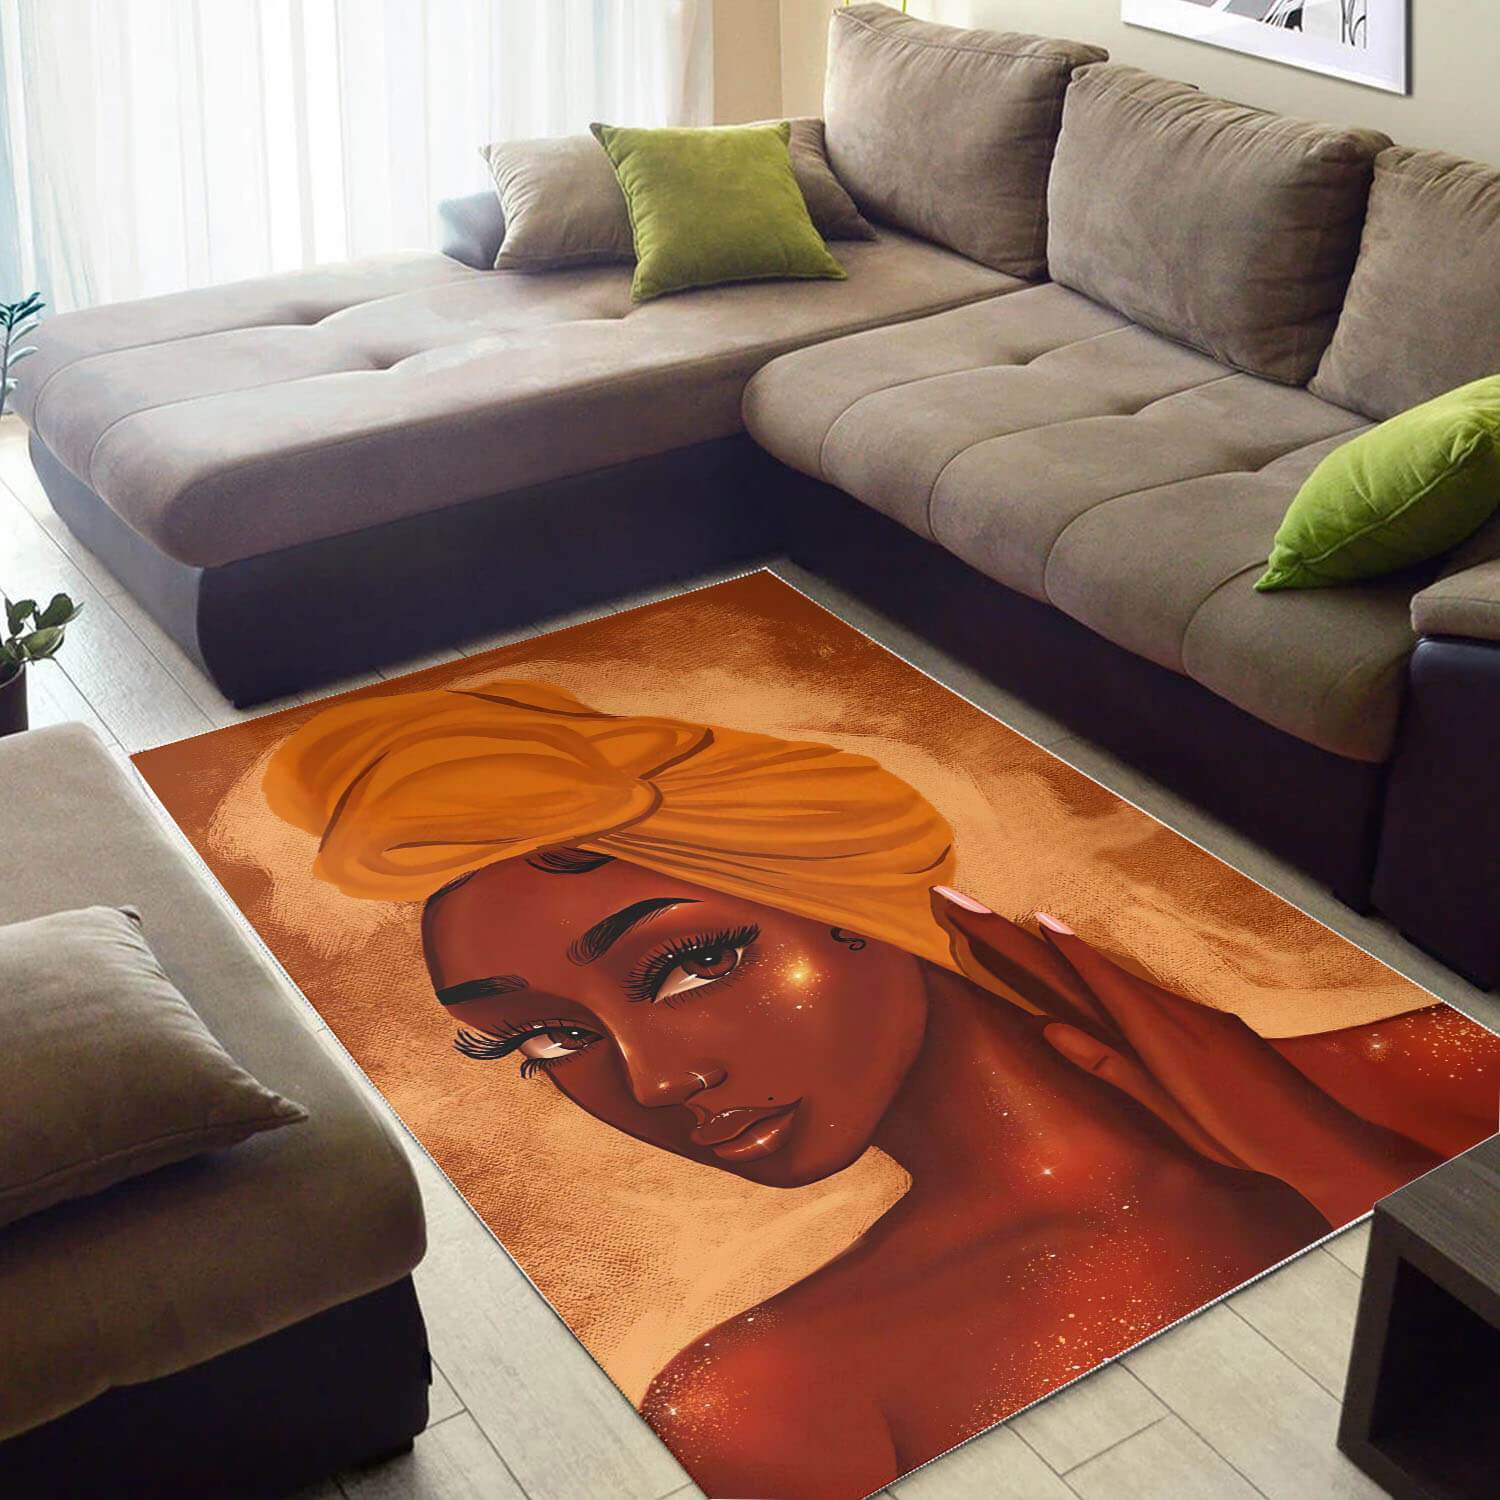 African American Area Rugs Beautiful Black Afro Girl African Inspired Area Rug Afrocentric Home Decor WBG04926